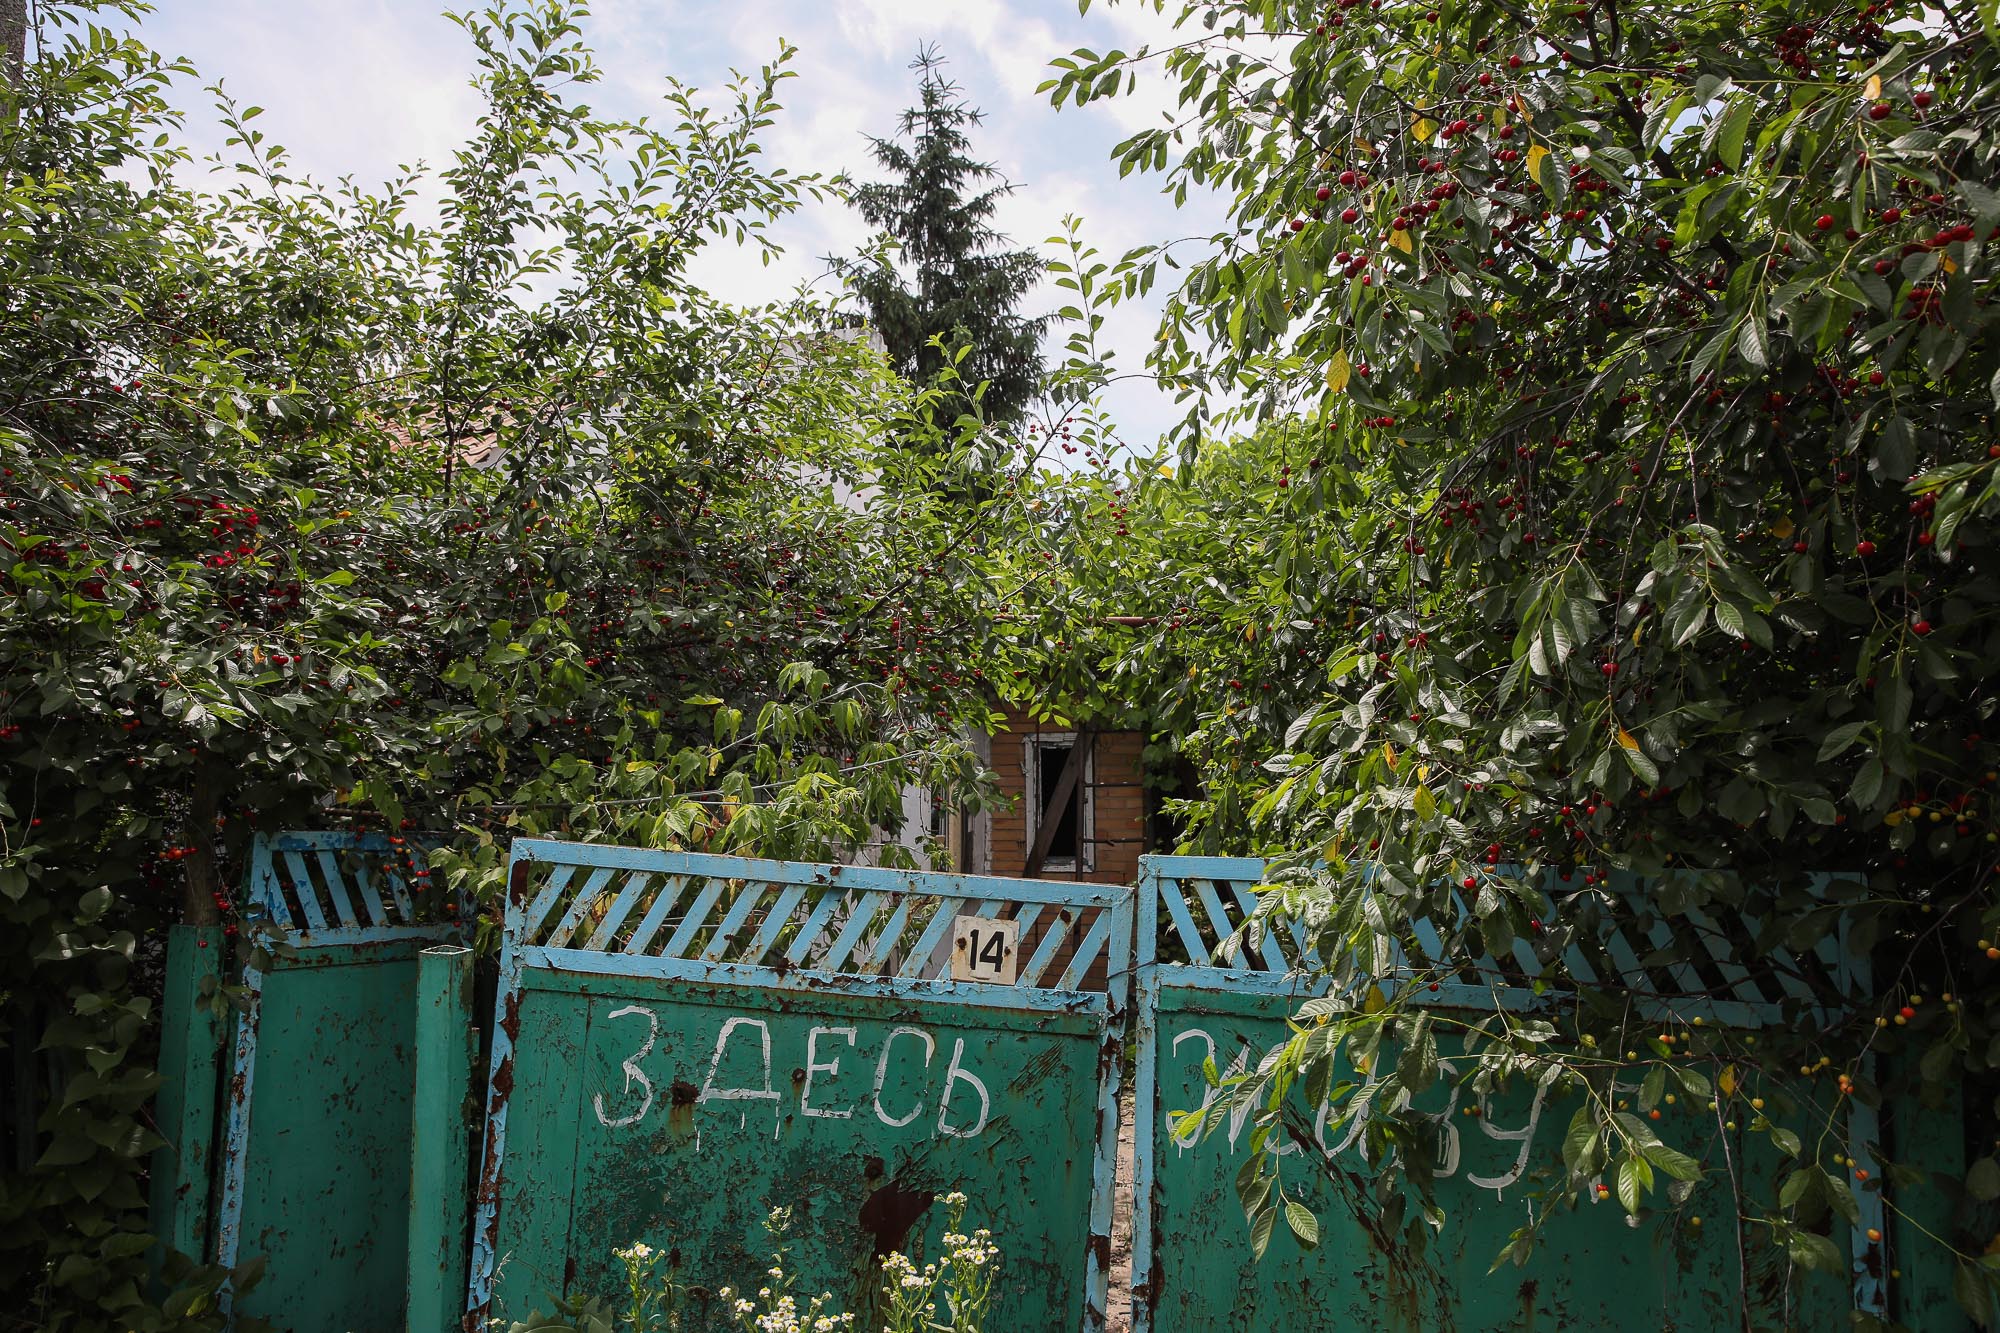 A &#8220;People live here&#8221; writing in Russian painted on a metal gate, pictured in the town of Opytne, eastern Ukraine, on June 12, 2019.